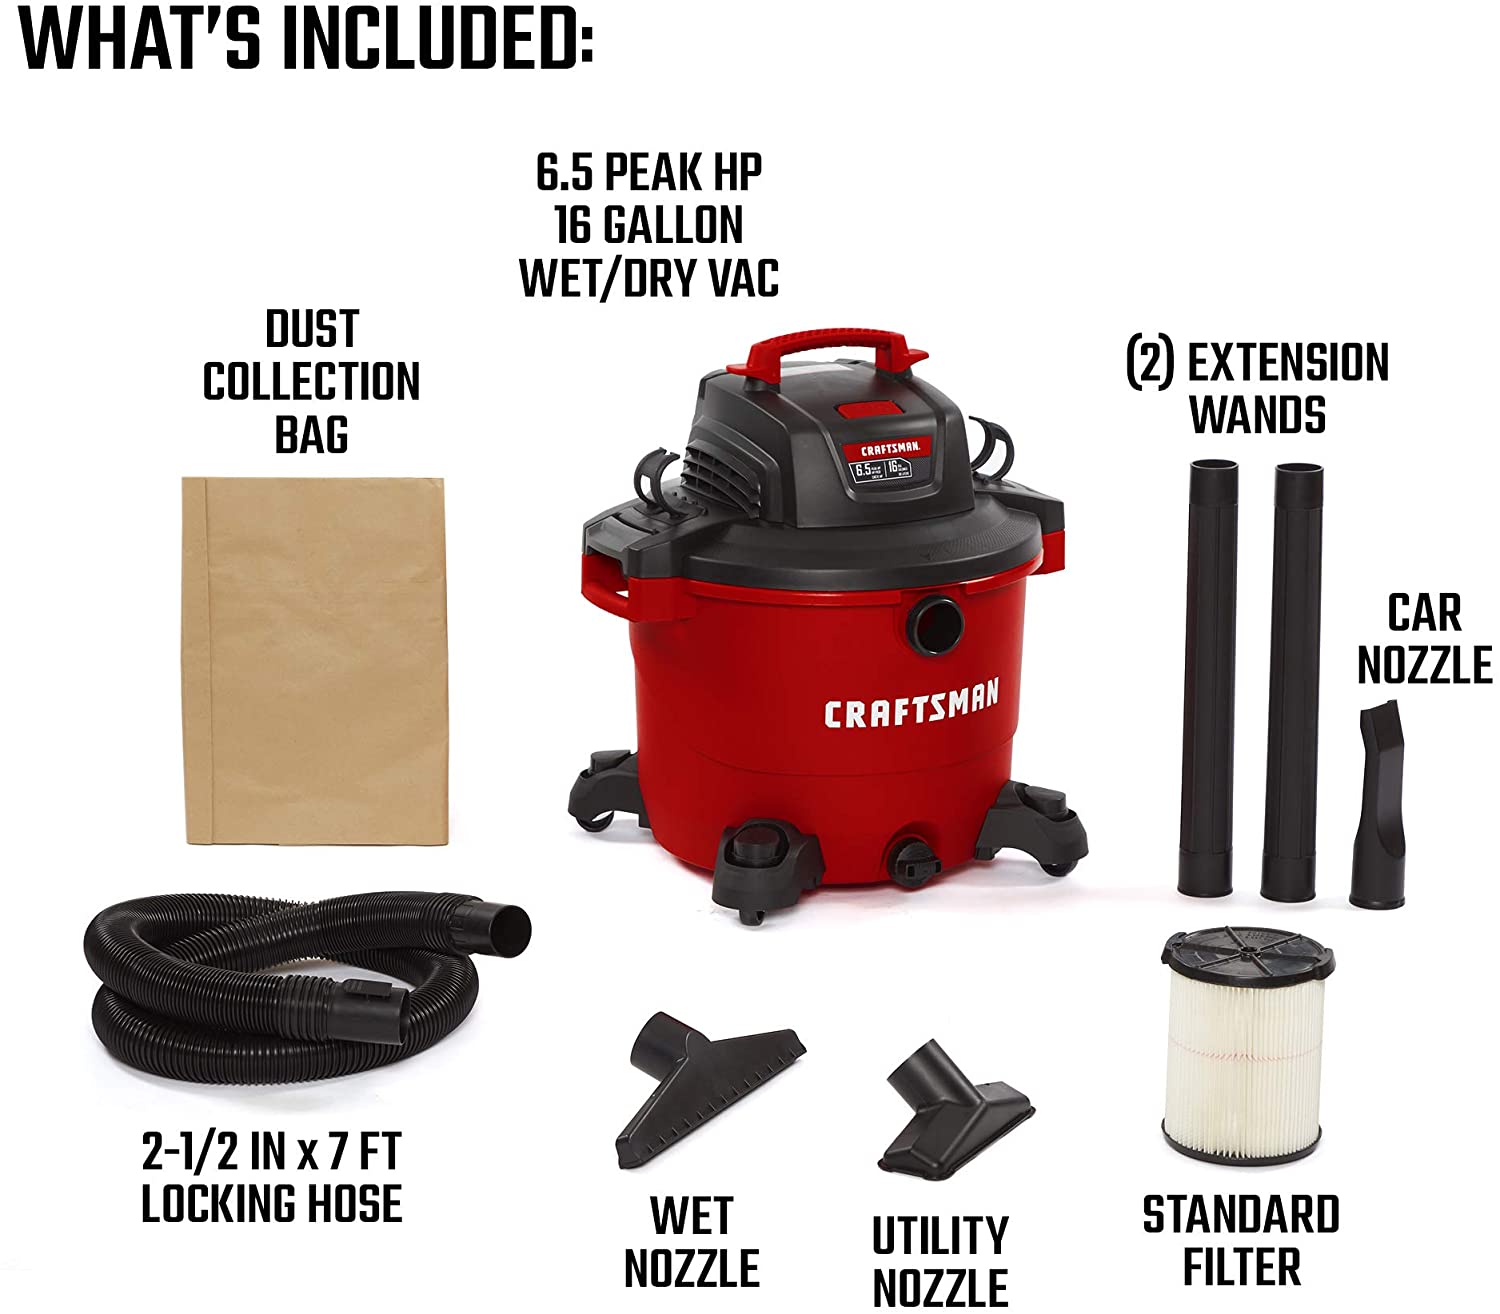 Craftsman CMXEVBE17595 16 Gallon 6.5 Peak HP Wet/Dry Vac, Heavy-Duty Shop Vacuum with Attachments - image 4 of 4